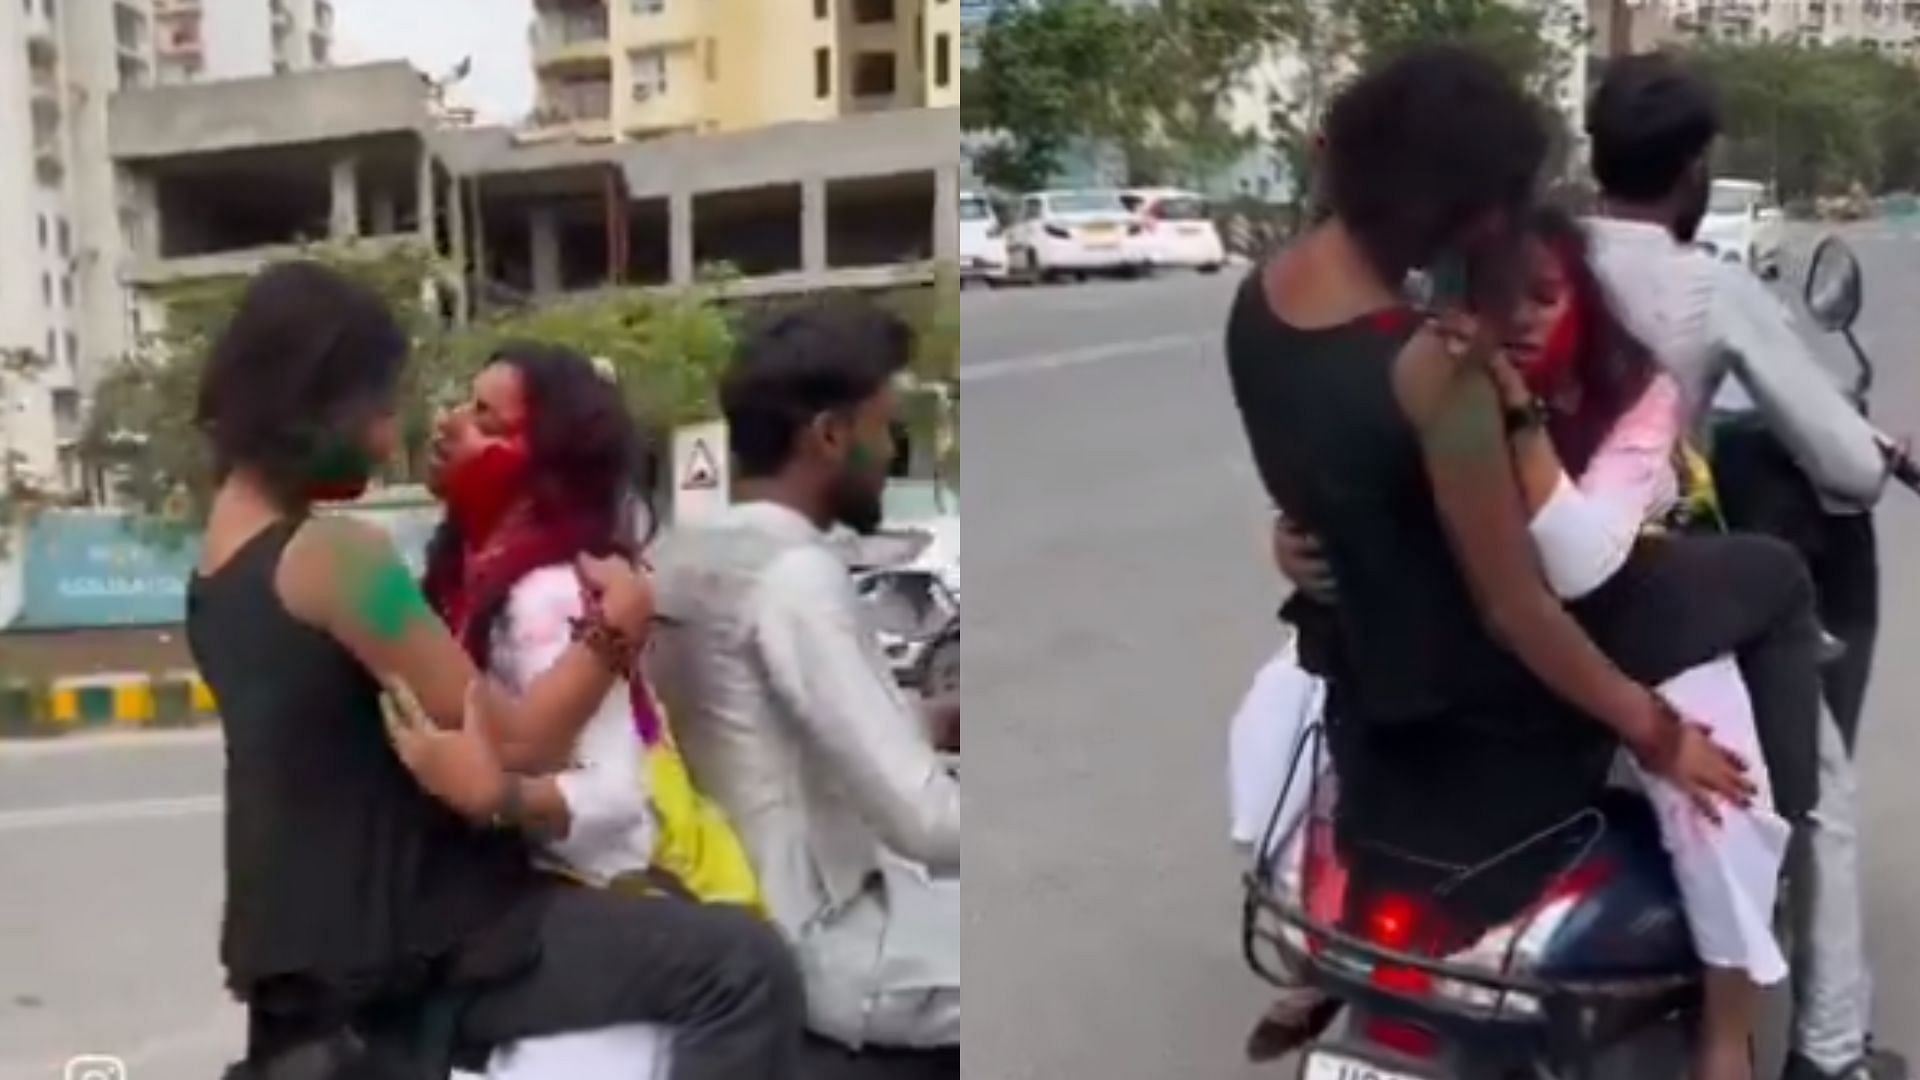 Noida girls played obscene Holi on moving scooty video went viral